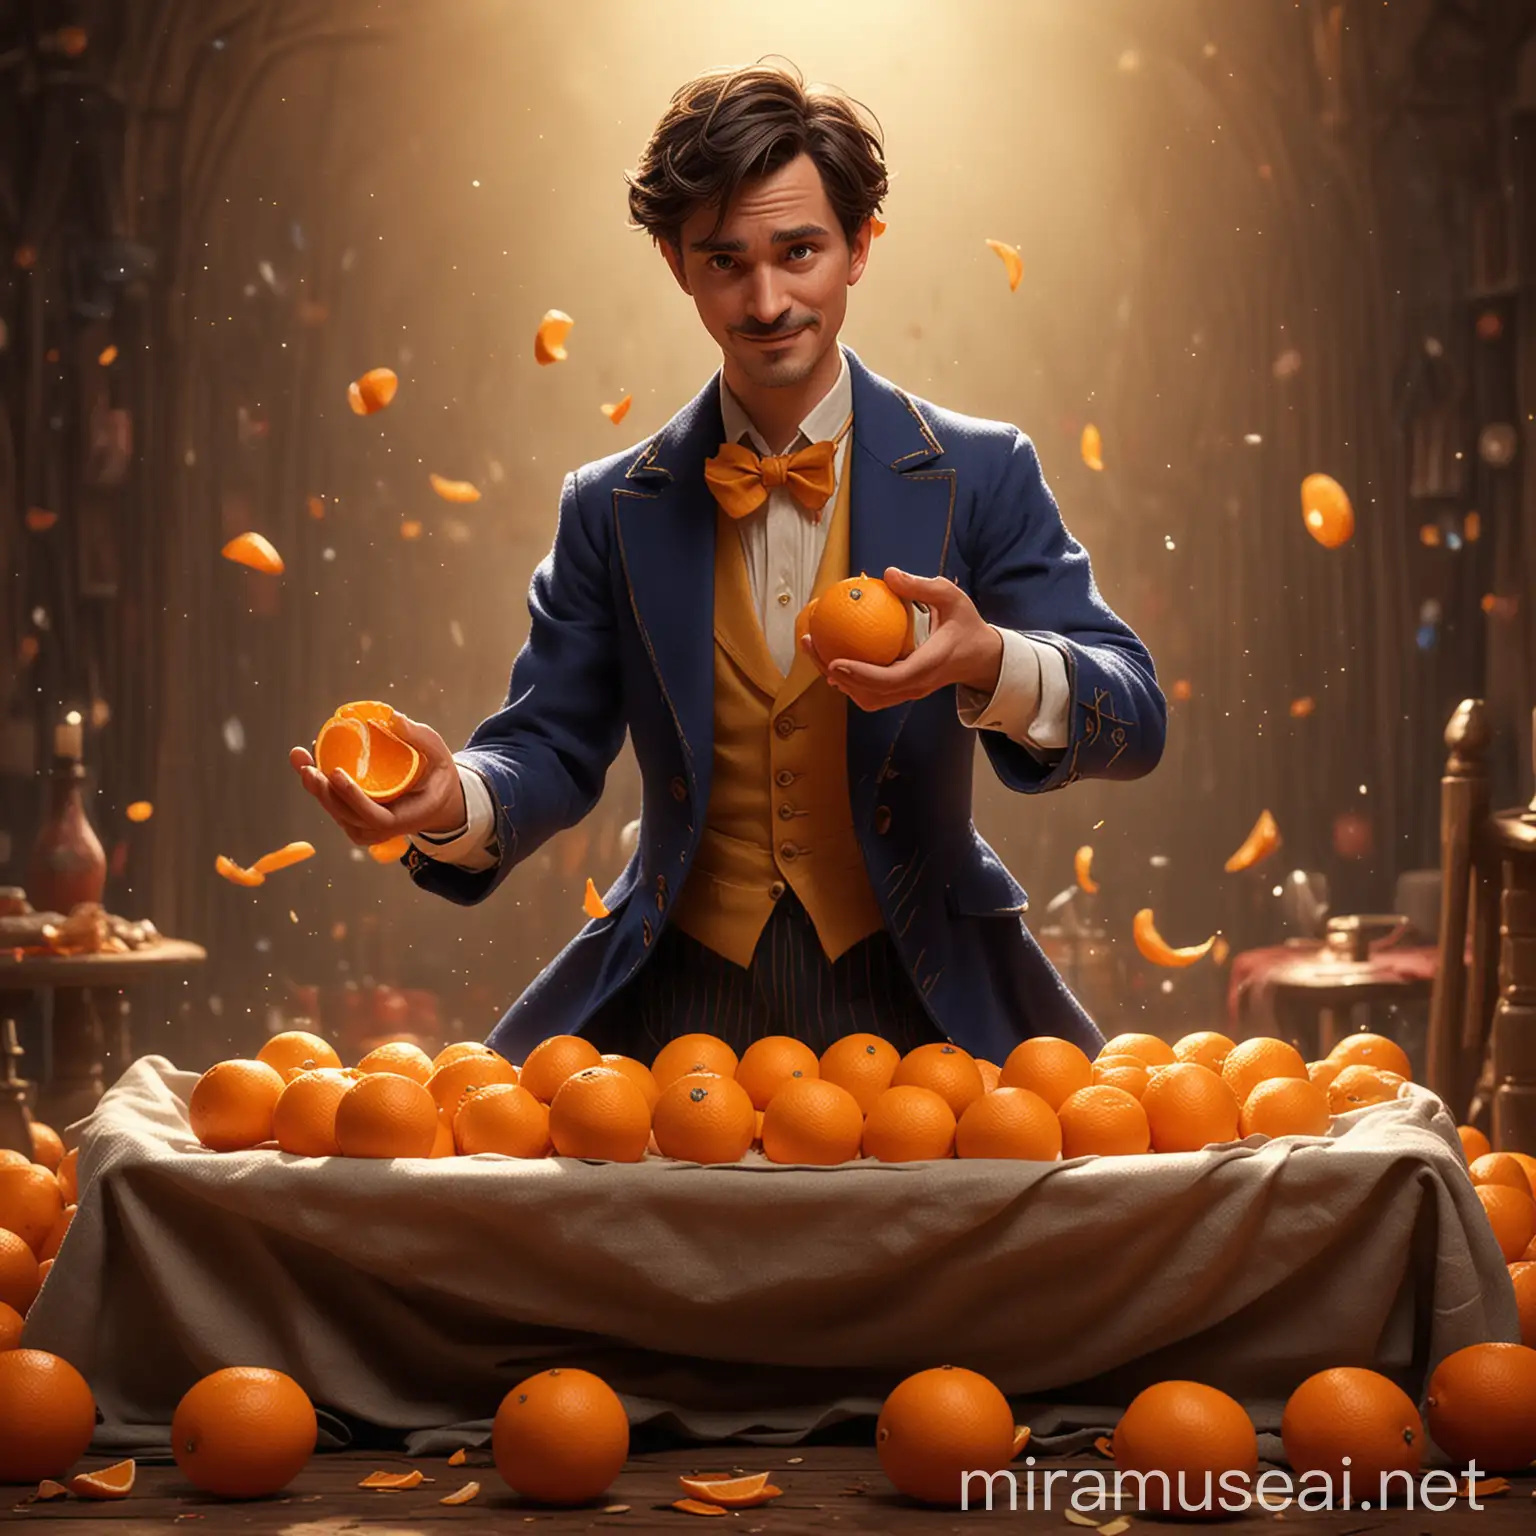 The magician was performing on stage, holding a cloth in his hand. After opening it, a pile of oranges appeared on the table
，disney pixar style